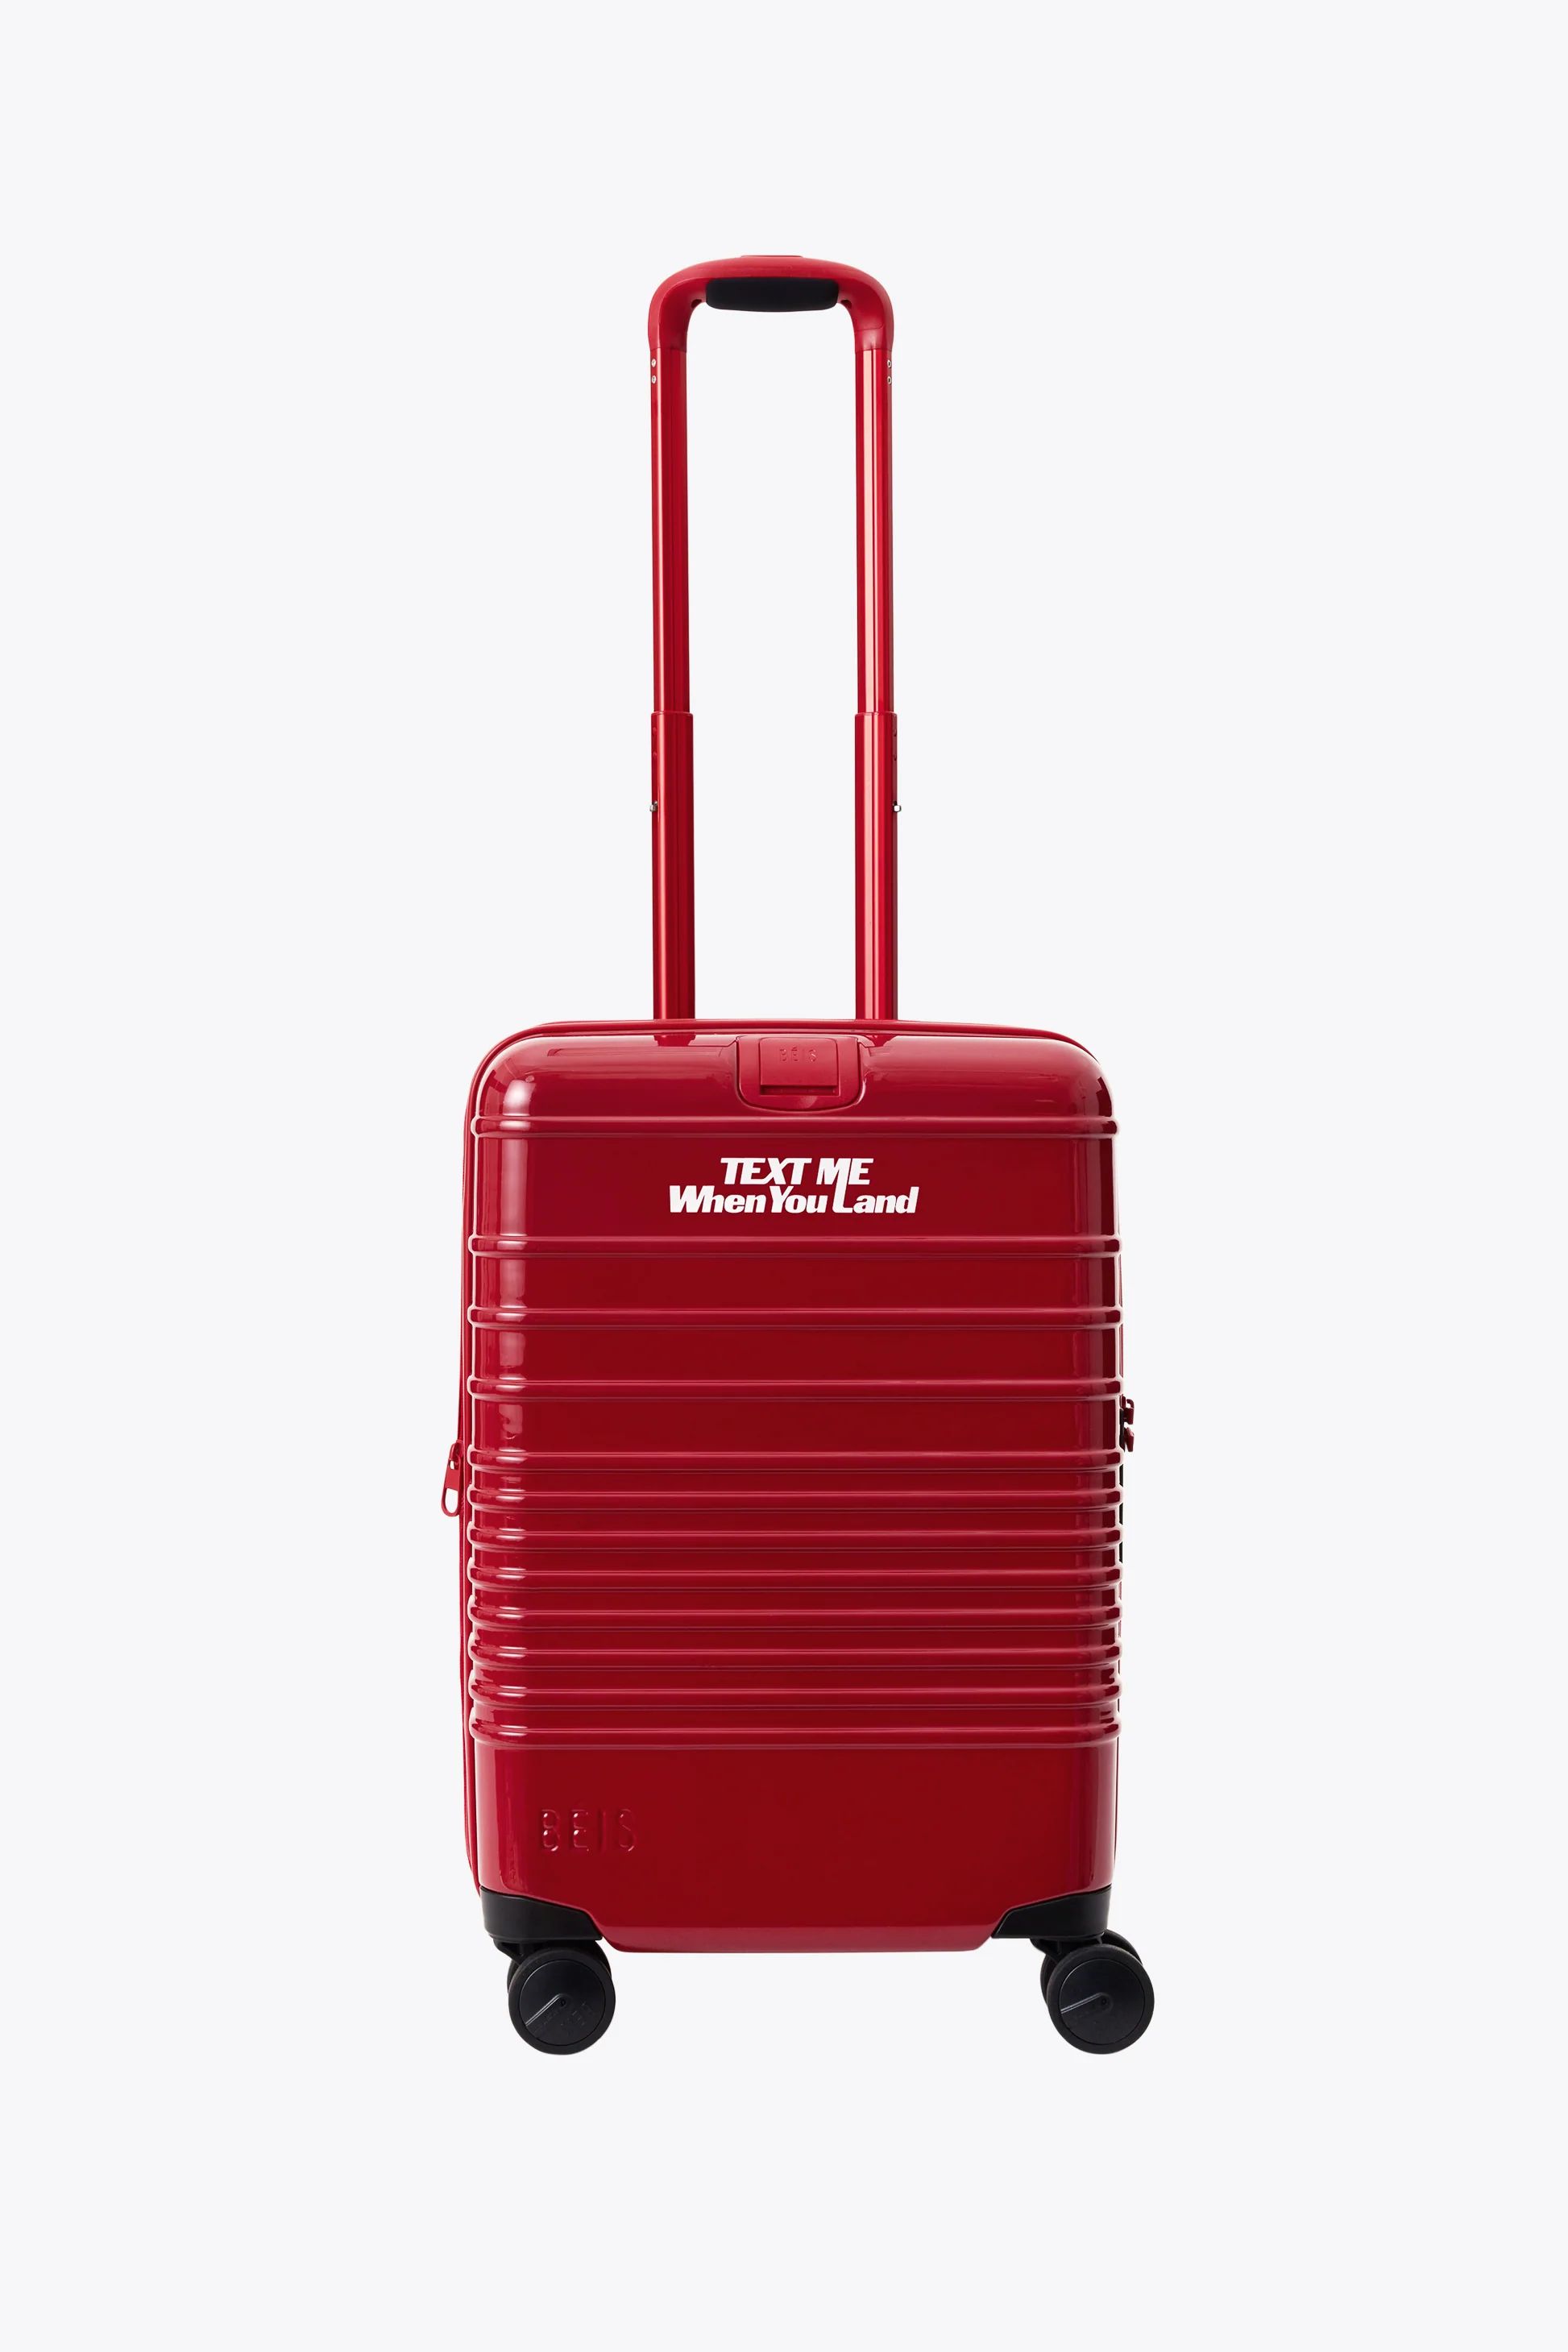 BÉIS x Lonely Ghost 'The Carry-On Roller' in Text Me Red - Red Carry-On Luggage & Suitcase | BÉIS Travel